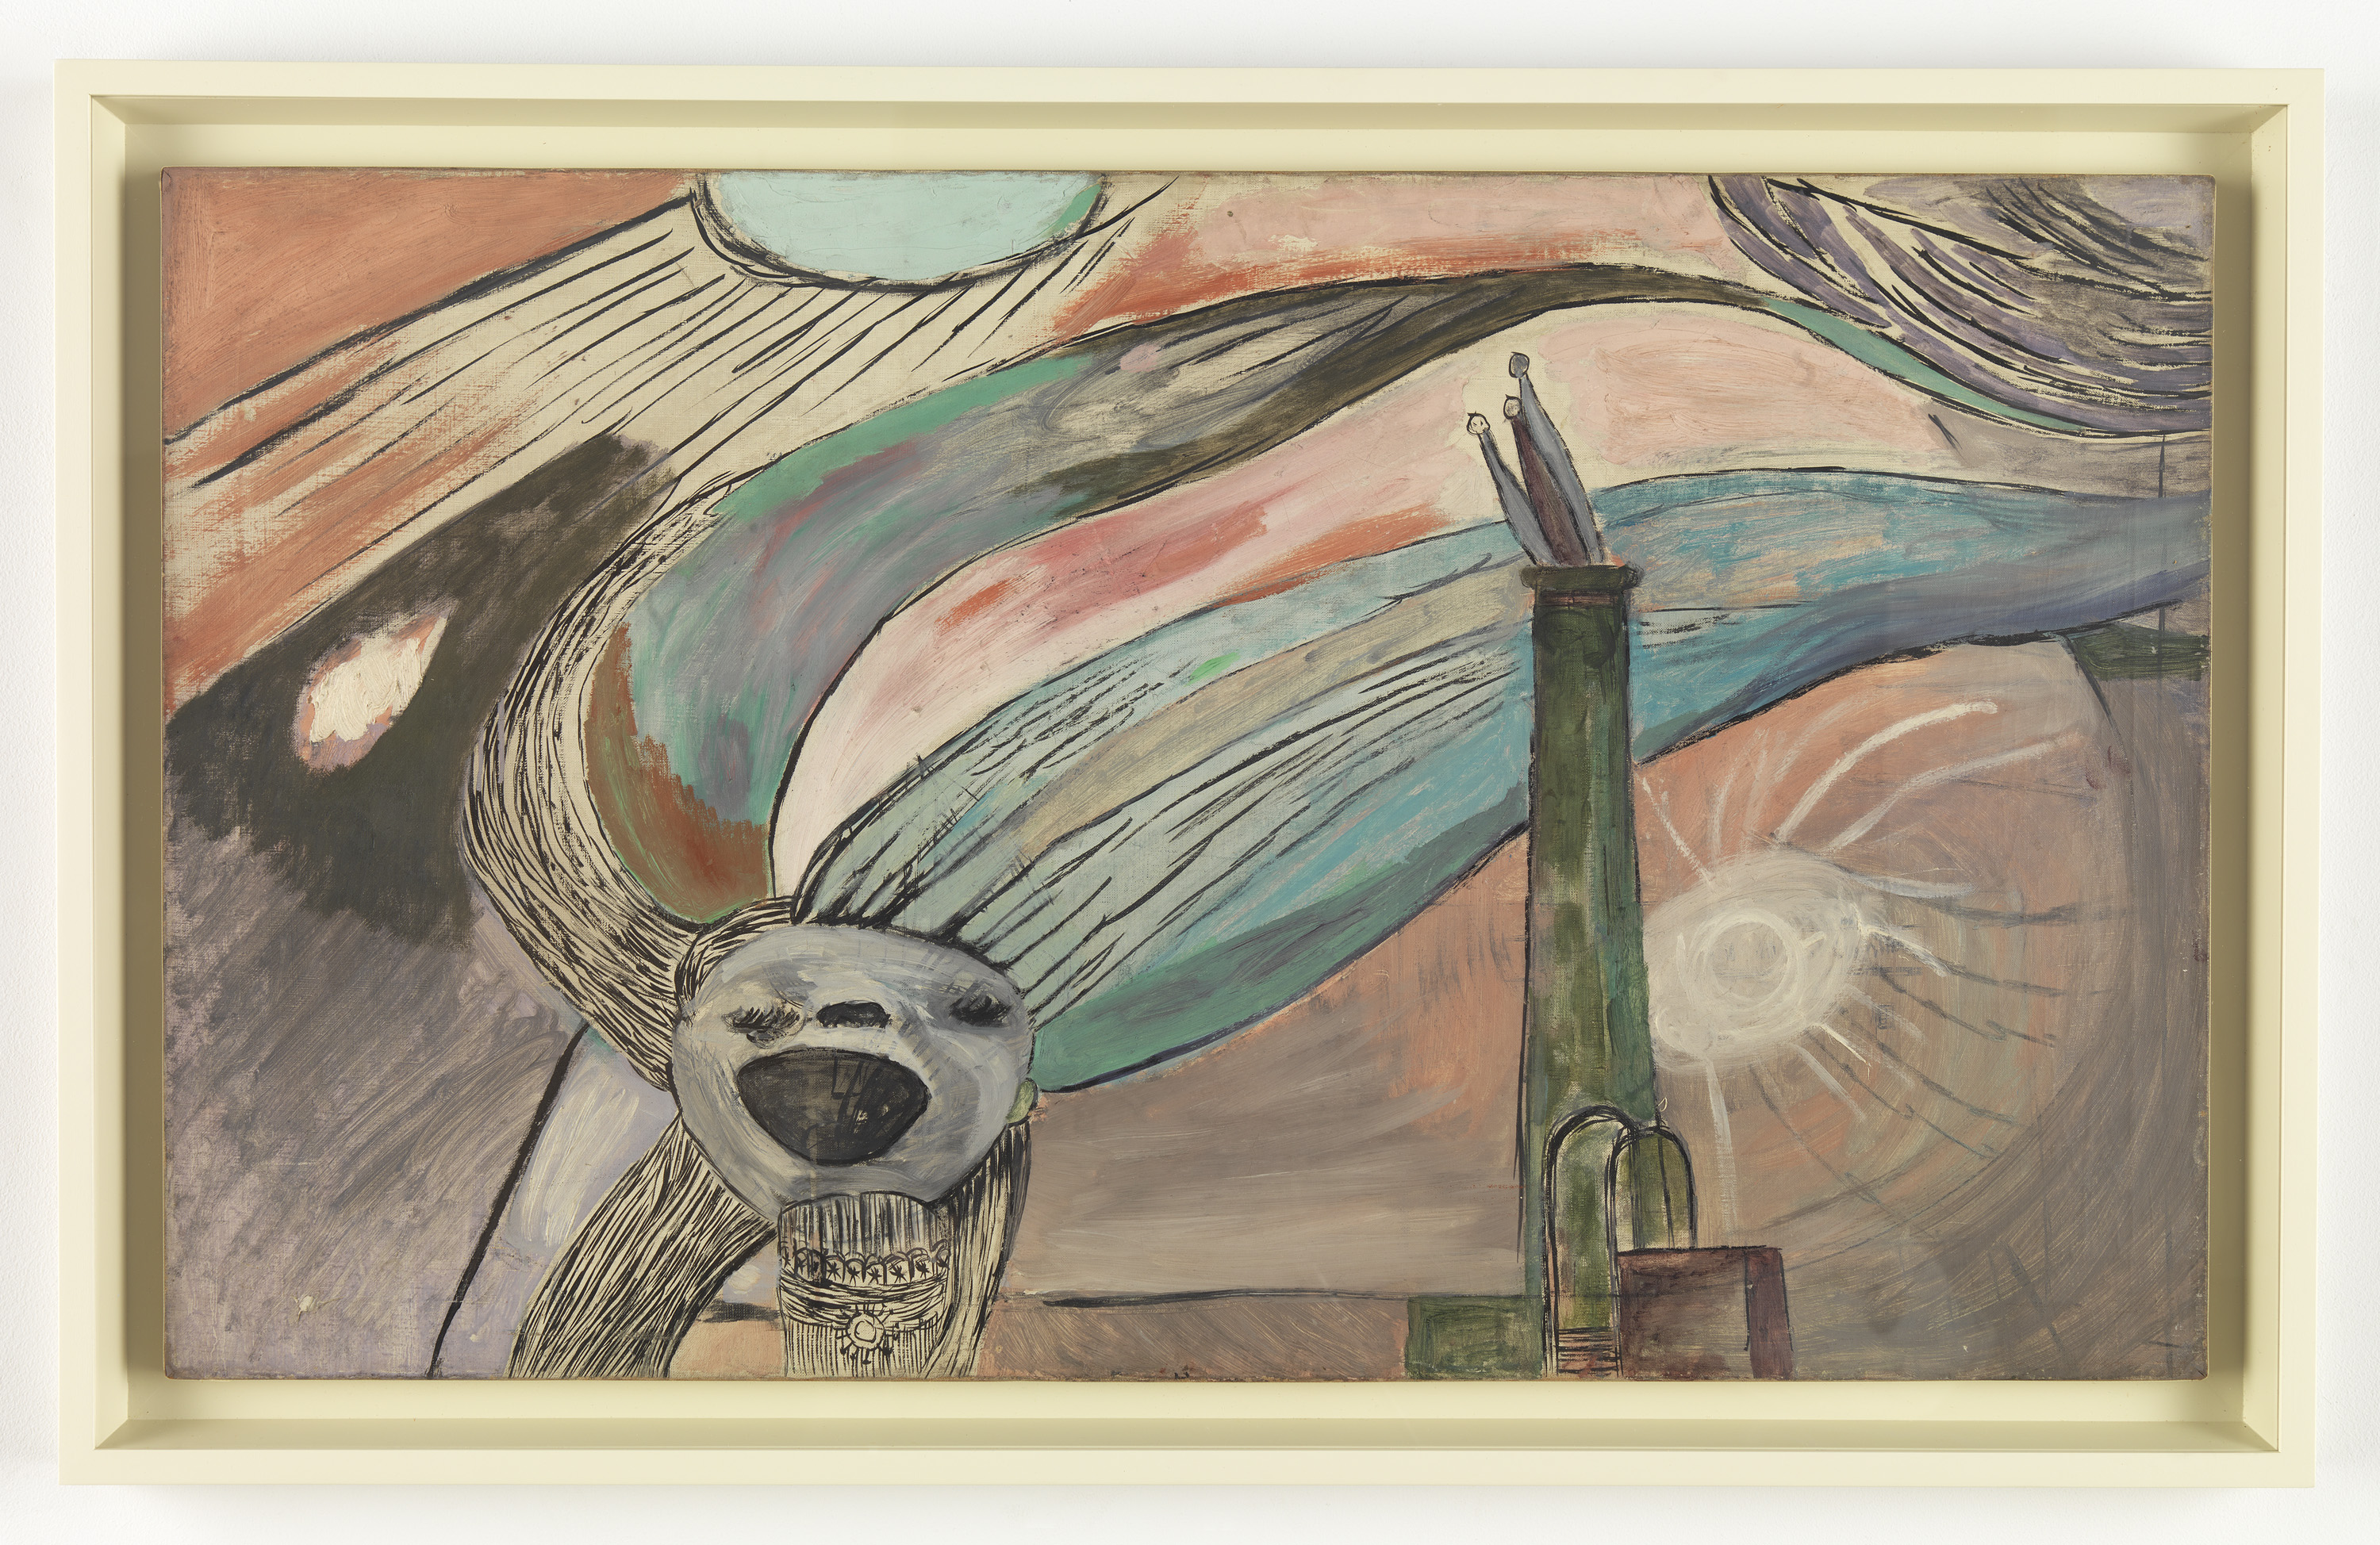 Louise Bourgeois, ‘Untitled,’ 1946-1947. Oil on canvas, 26 by 44in (66 by 111.8cm). ARTIST ROOMS, Tate and National Galleries of Scotland, Lent by the Artist Rooms Foundation 2018. Photo by Christopher Burke. © The Easton Foundation/Licensed by VAGA at Artists Rights Society (ARS), NY.